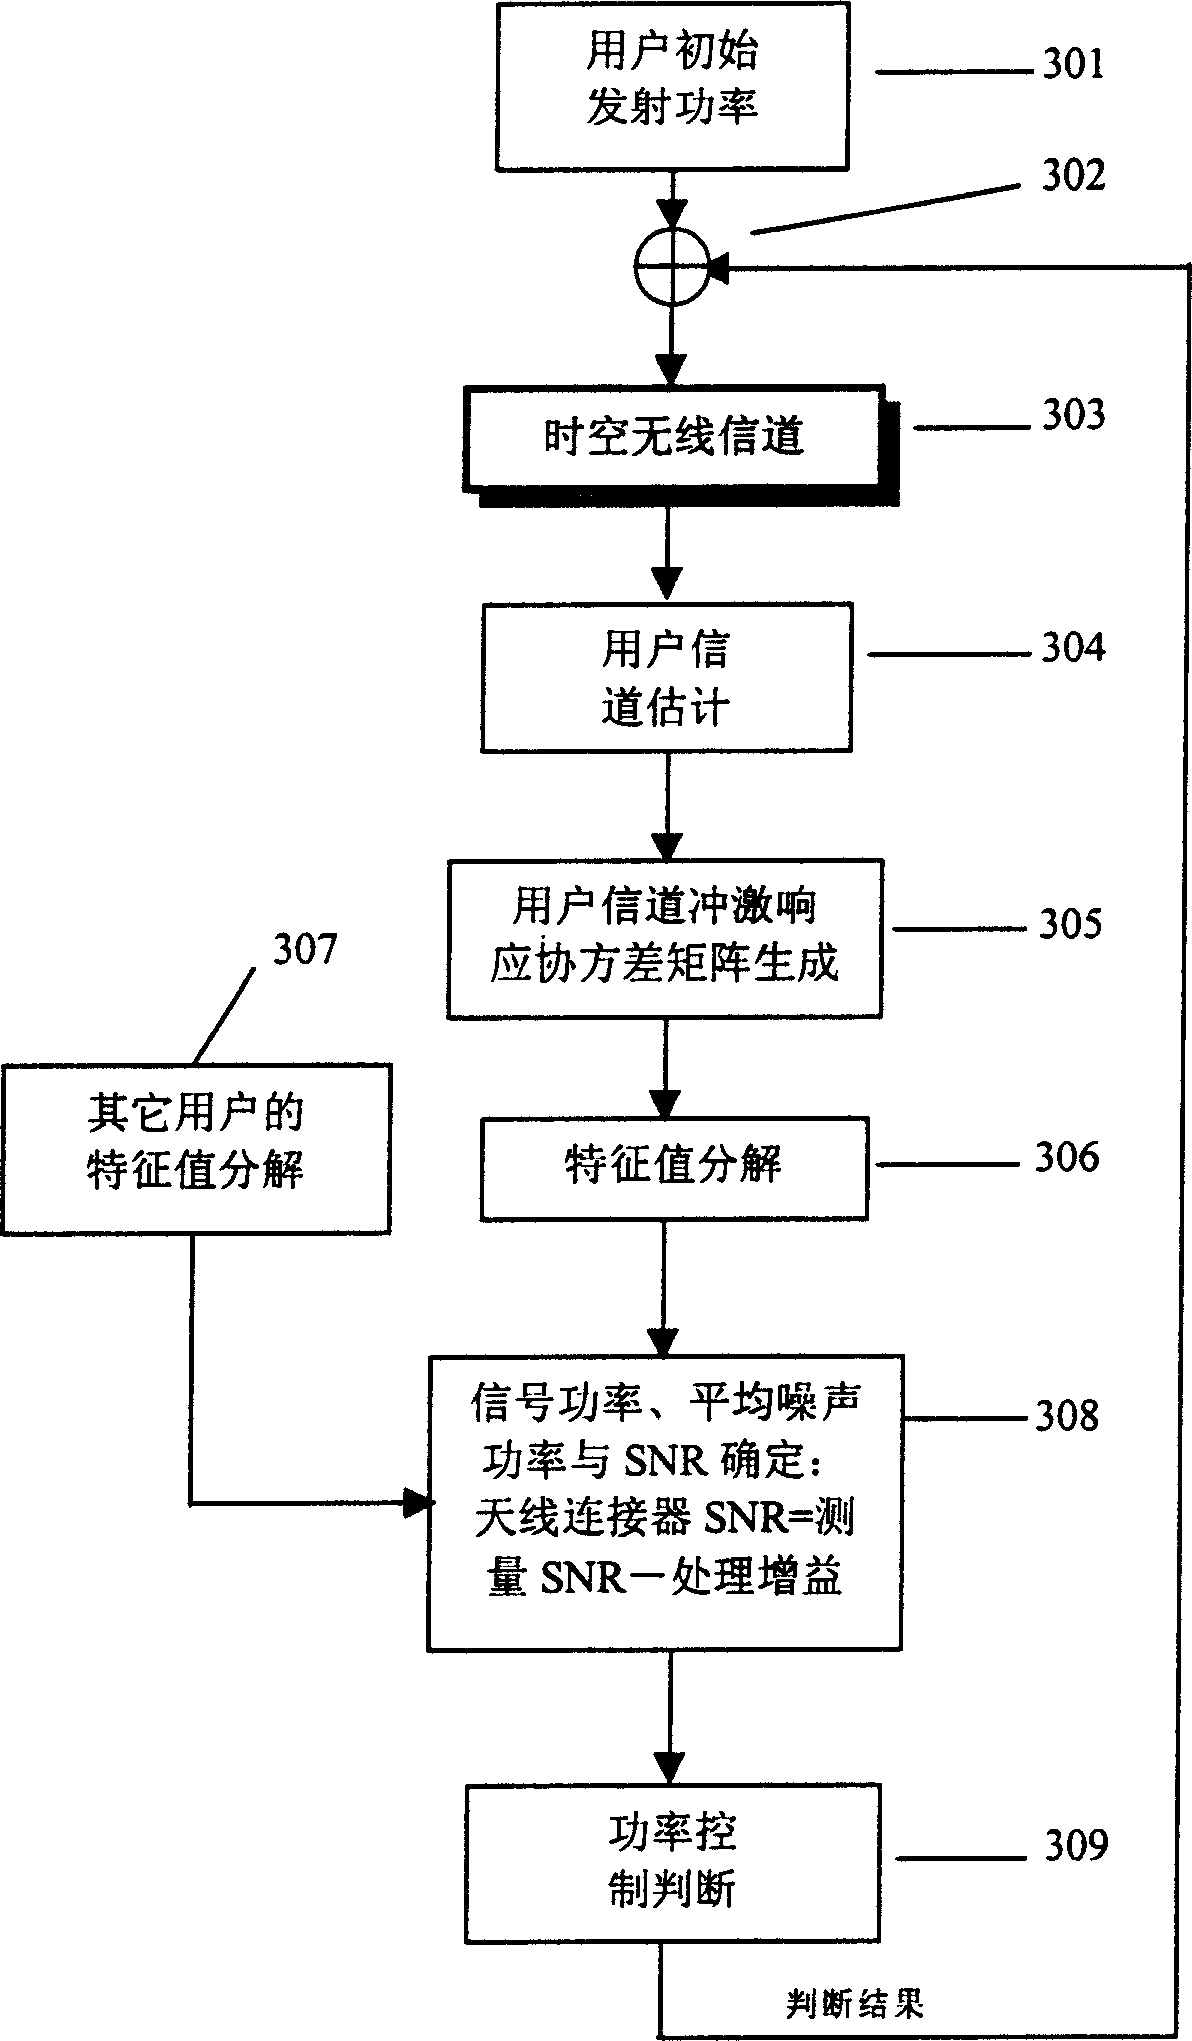 Signal-to-noise ratio measuring method based on array antennas mobile communication system